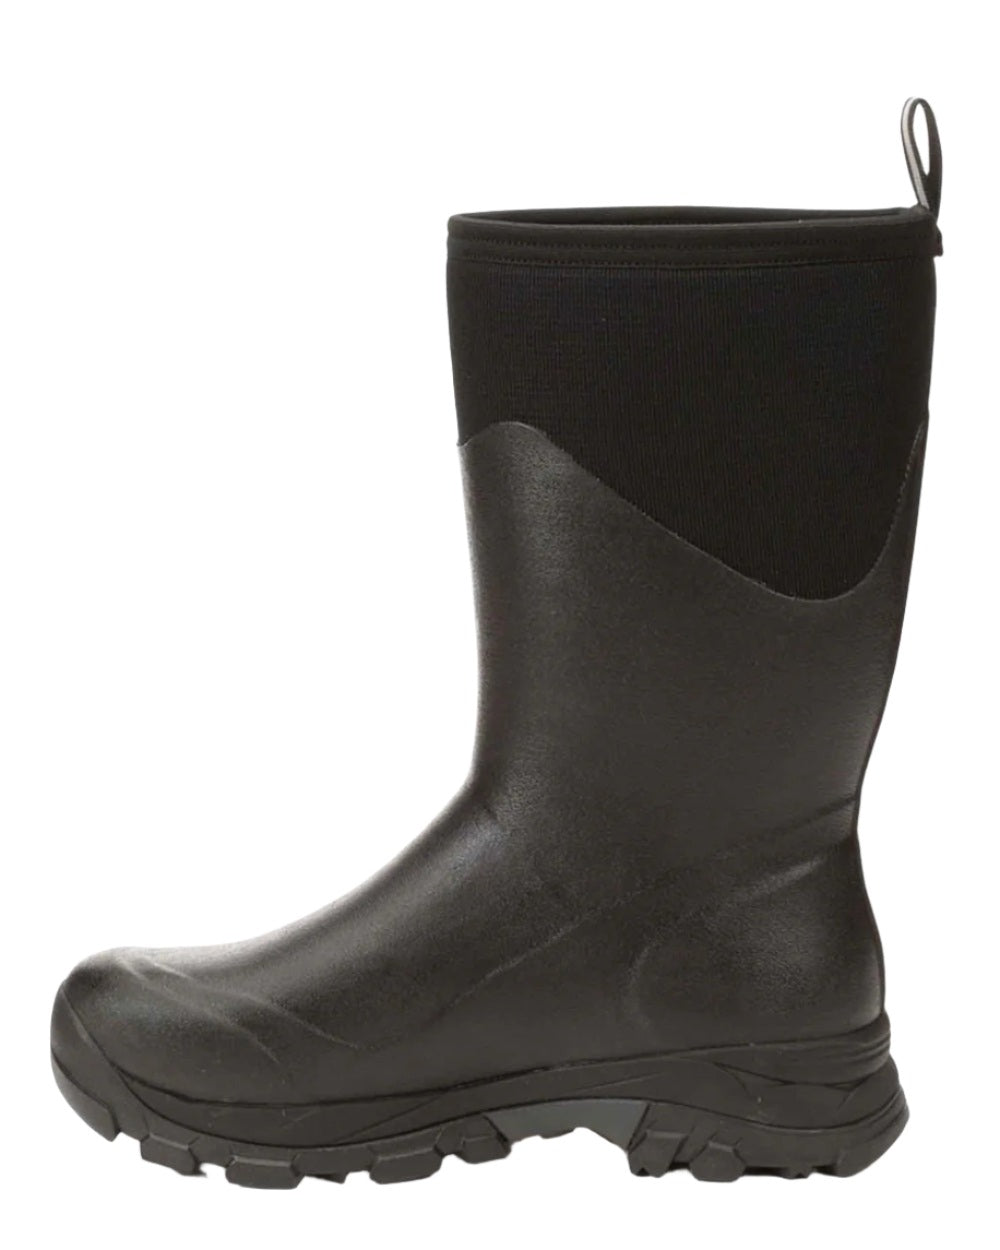 Black Coloured Muck Boots Mens Arctic Ice Vibram AG All Terrain Mid Wellingtons On A White Background